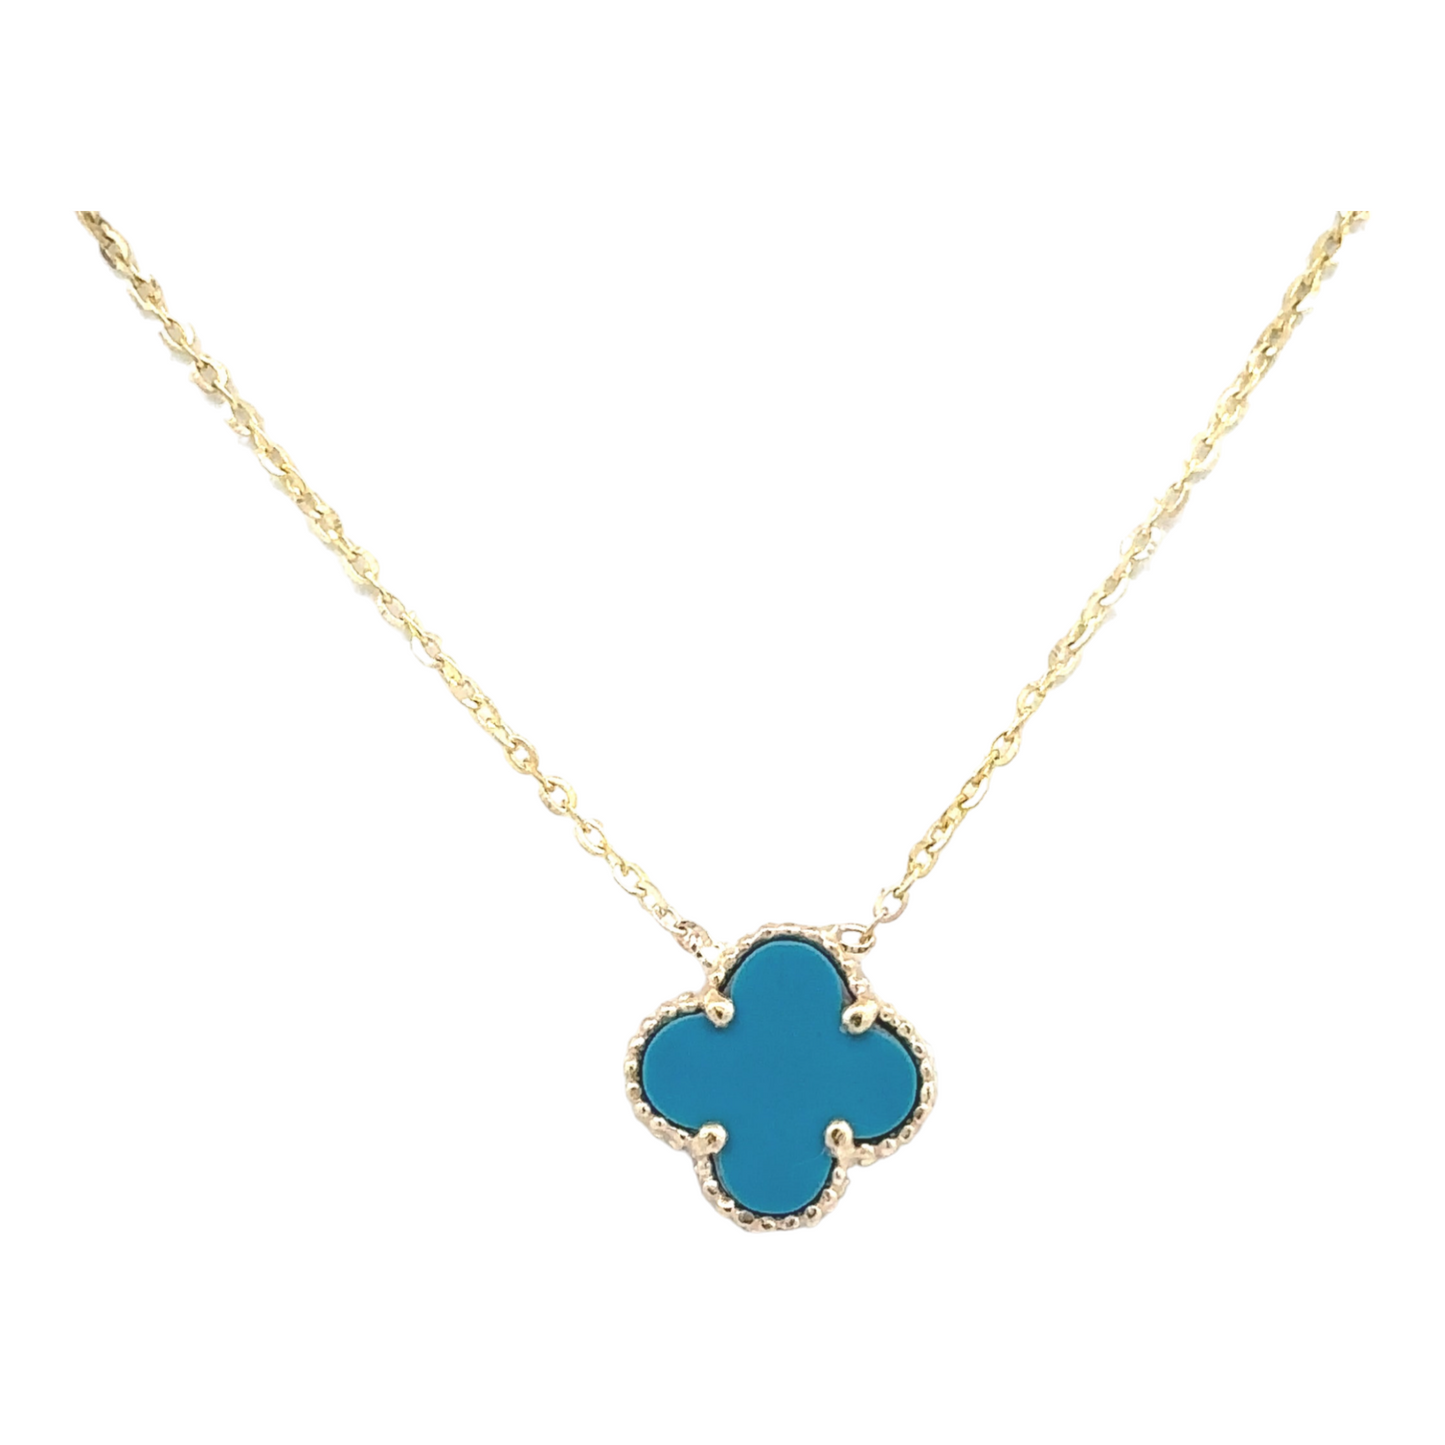 Turquoise clover leaf necklace